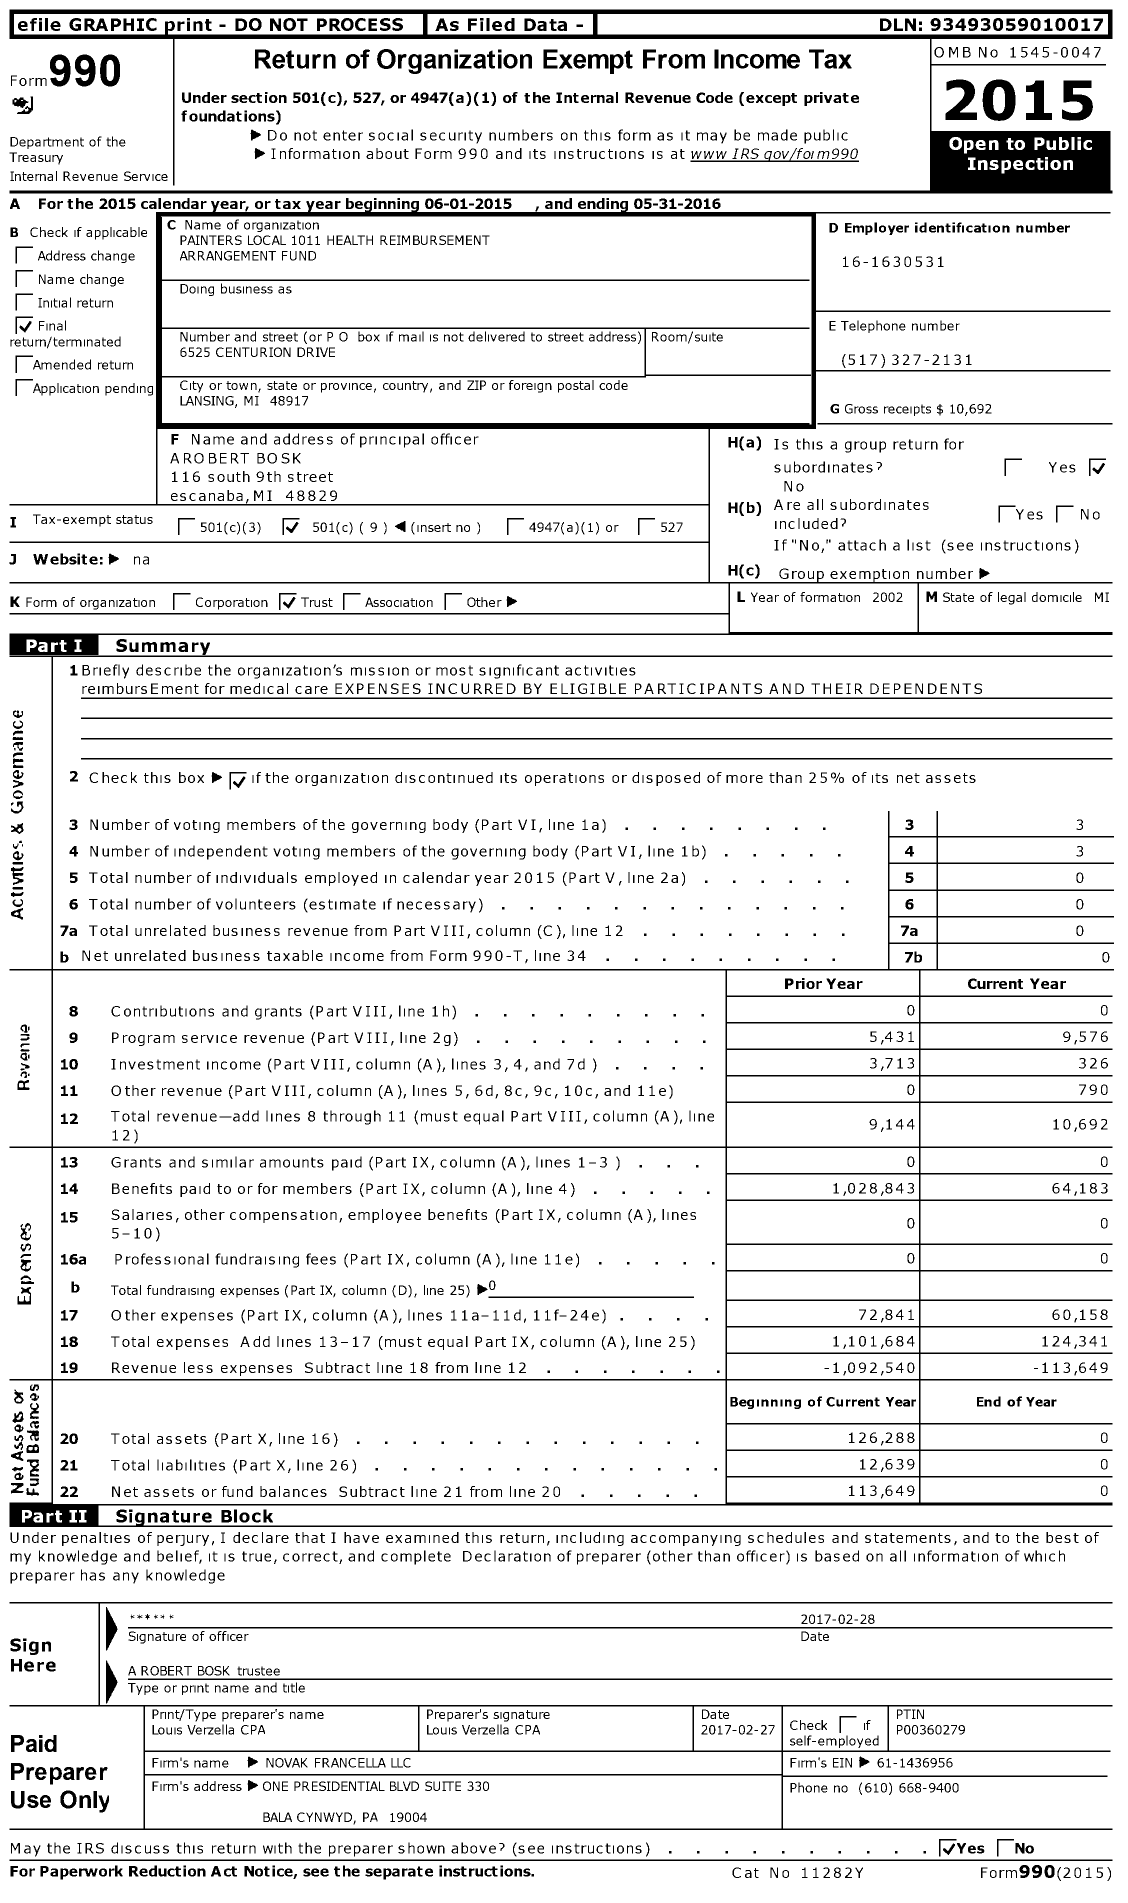 Image of first page of 2015 Form 990O for Painters Local 1011 Health Reimbursement Arrangement Fund